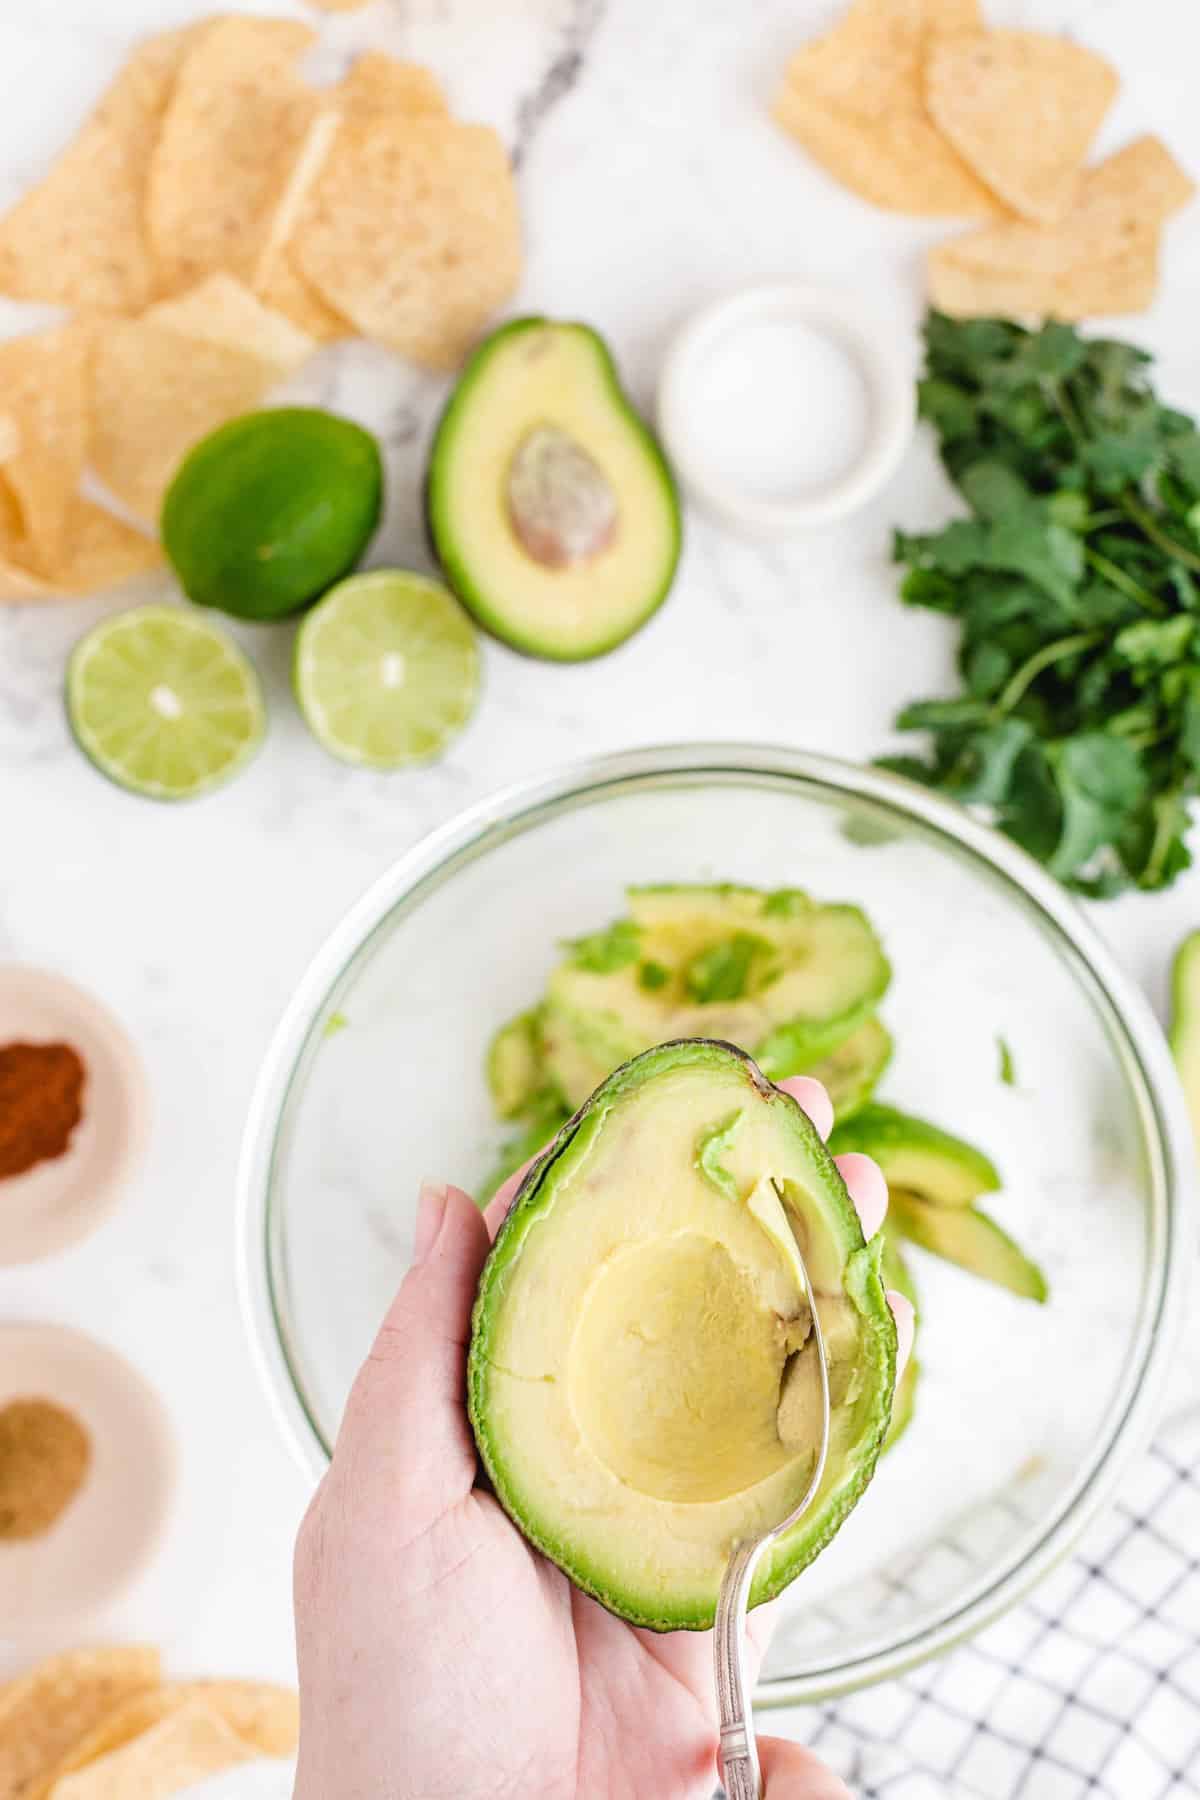 Slice avocados in half, remove pits, and scoop them into a bowl